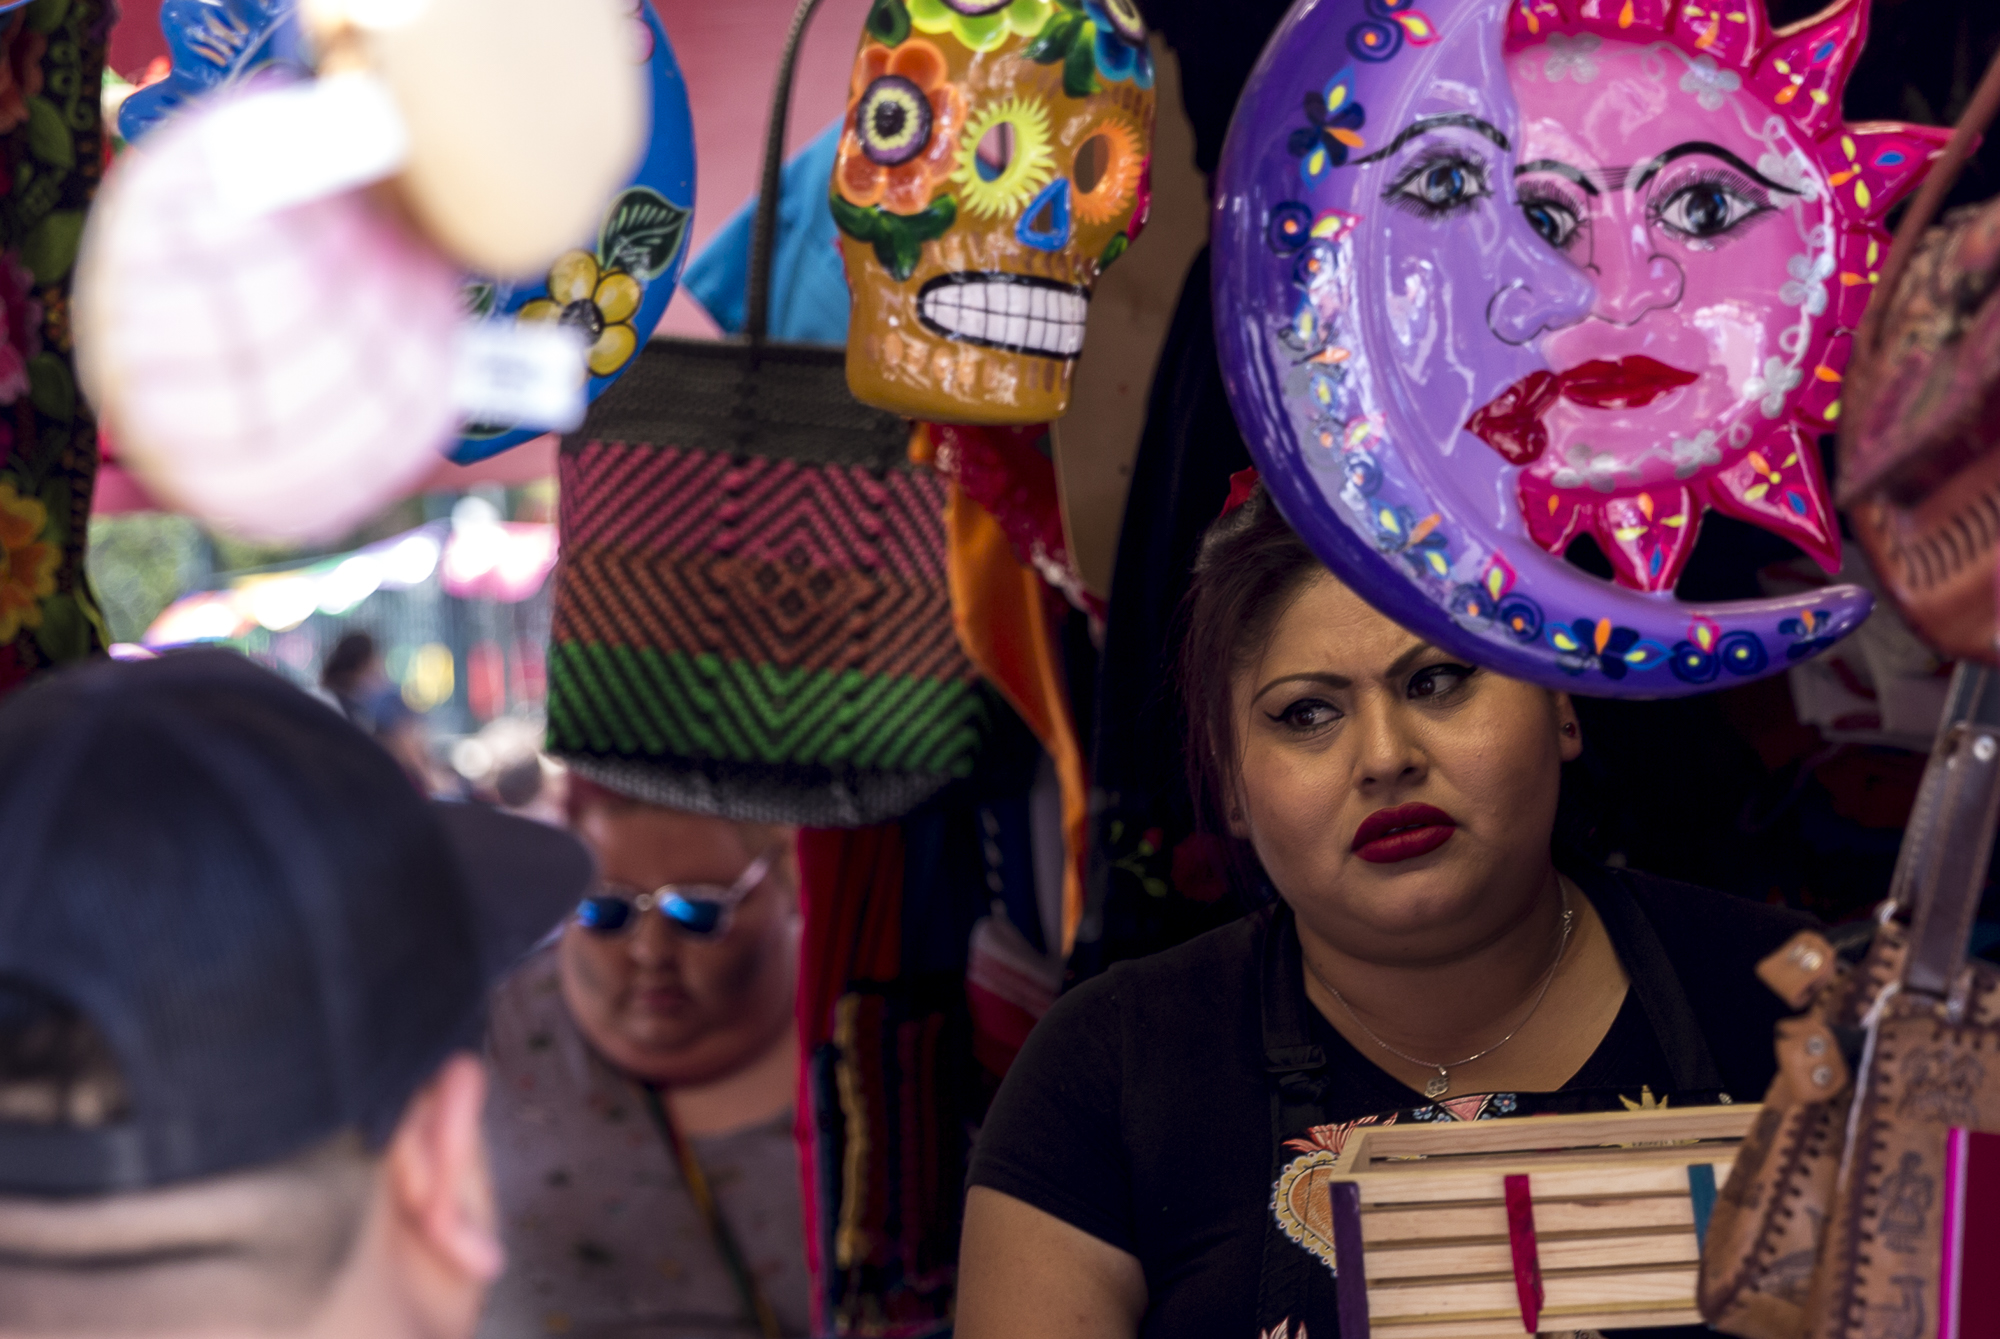  A stall owner has an argument with a customer over costs of one of her products being sold during the annual Olvera Street Cinco De Mayo celebration in Downtown Los Angeles, California on May 5, 2018. (Matthew Martin/Corsair Photo) 